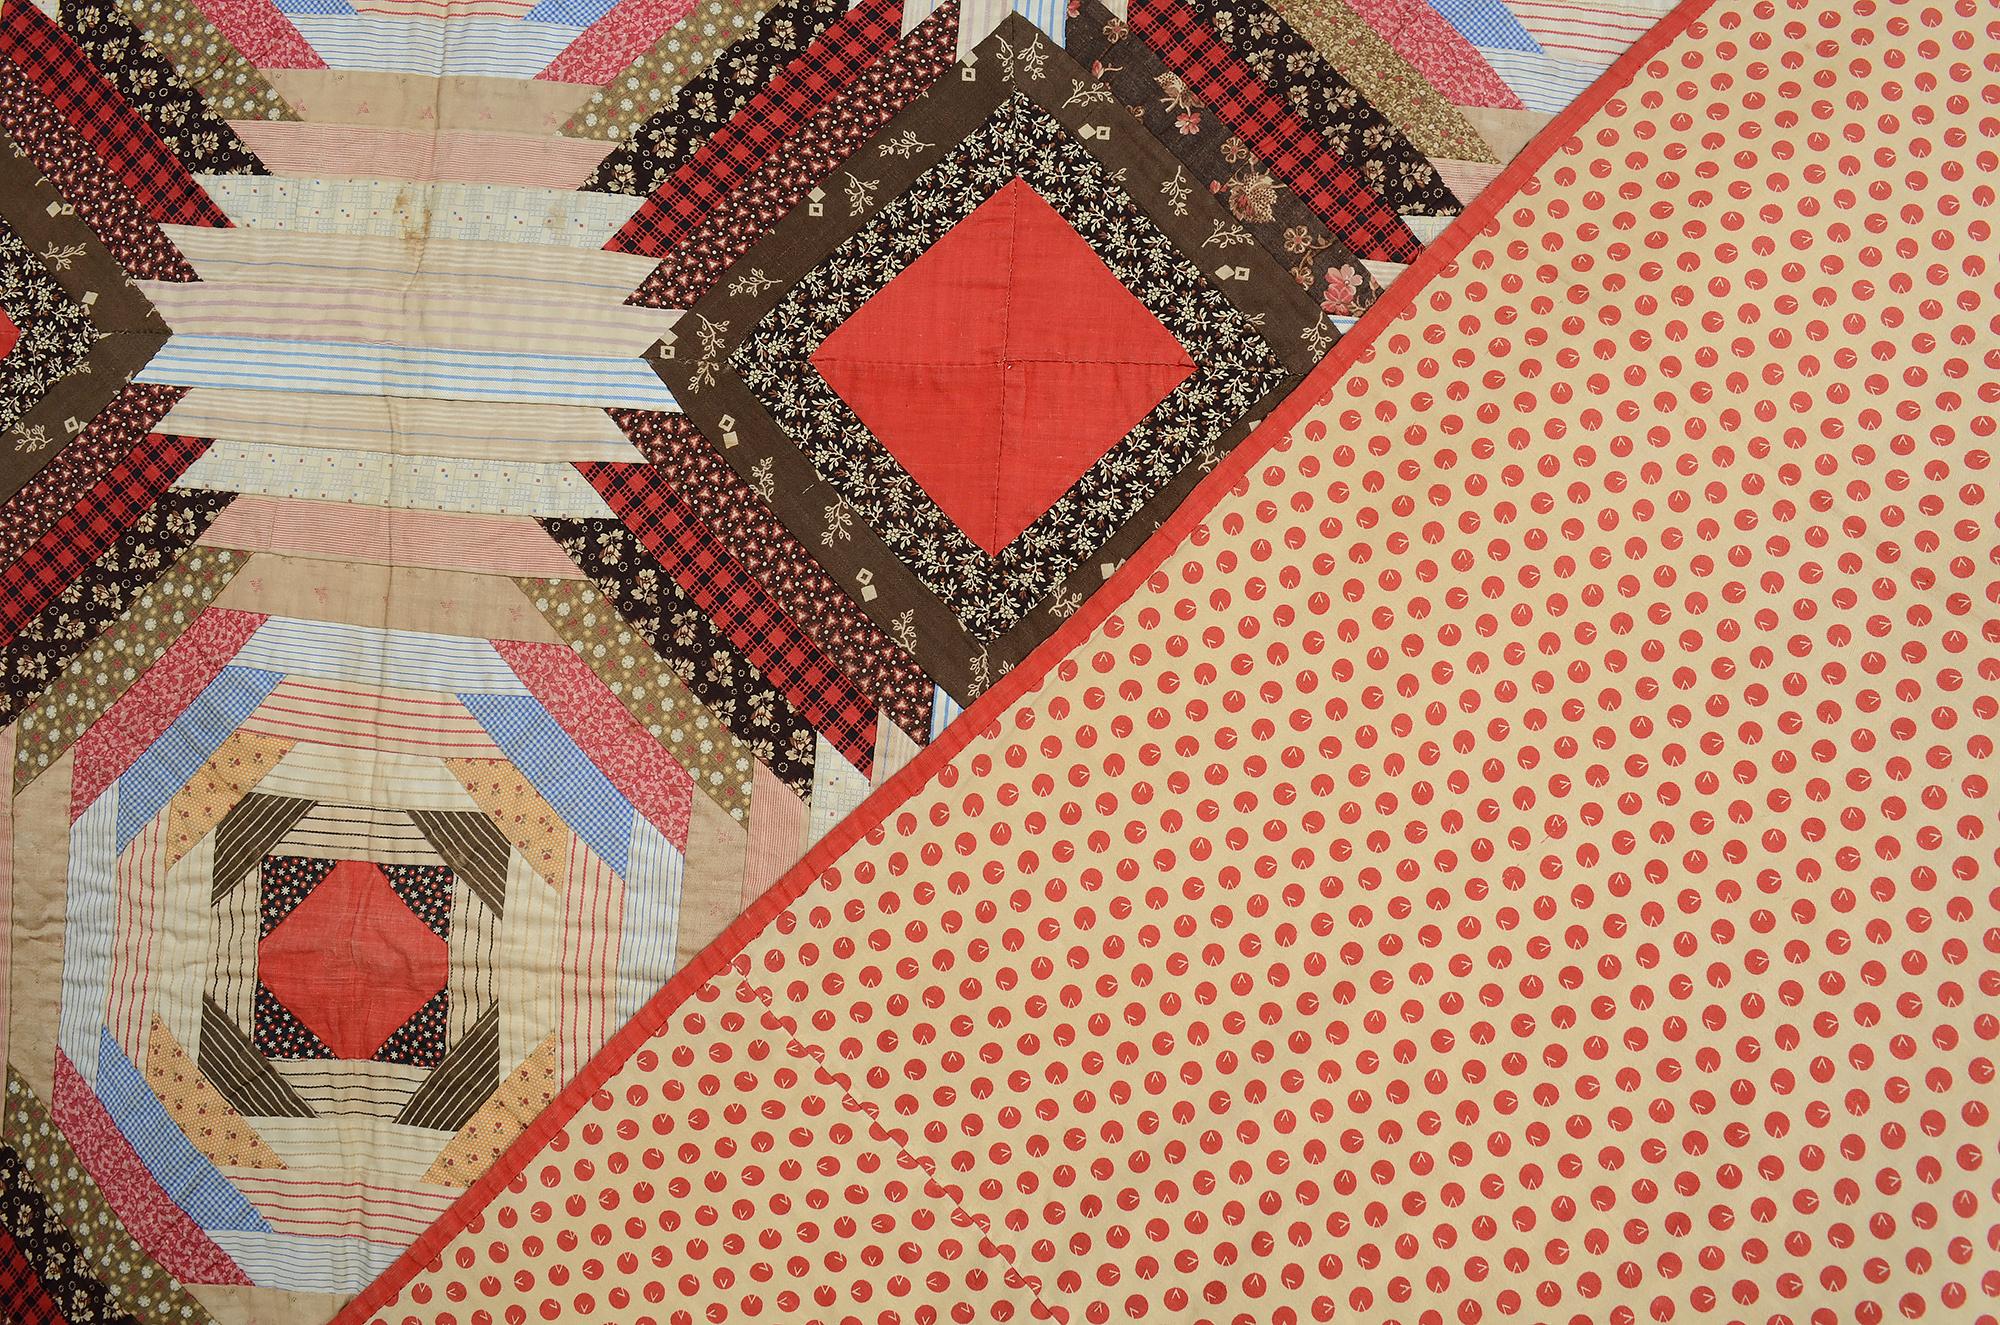 Late 19th Century Windmill Blades Quilt